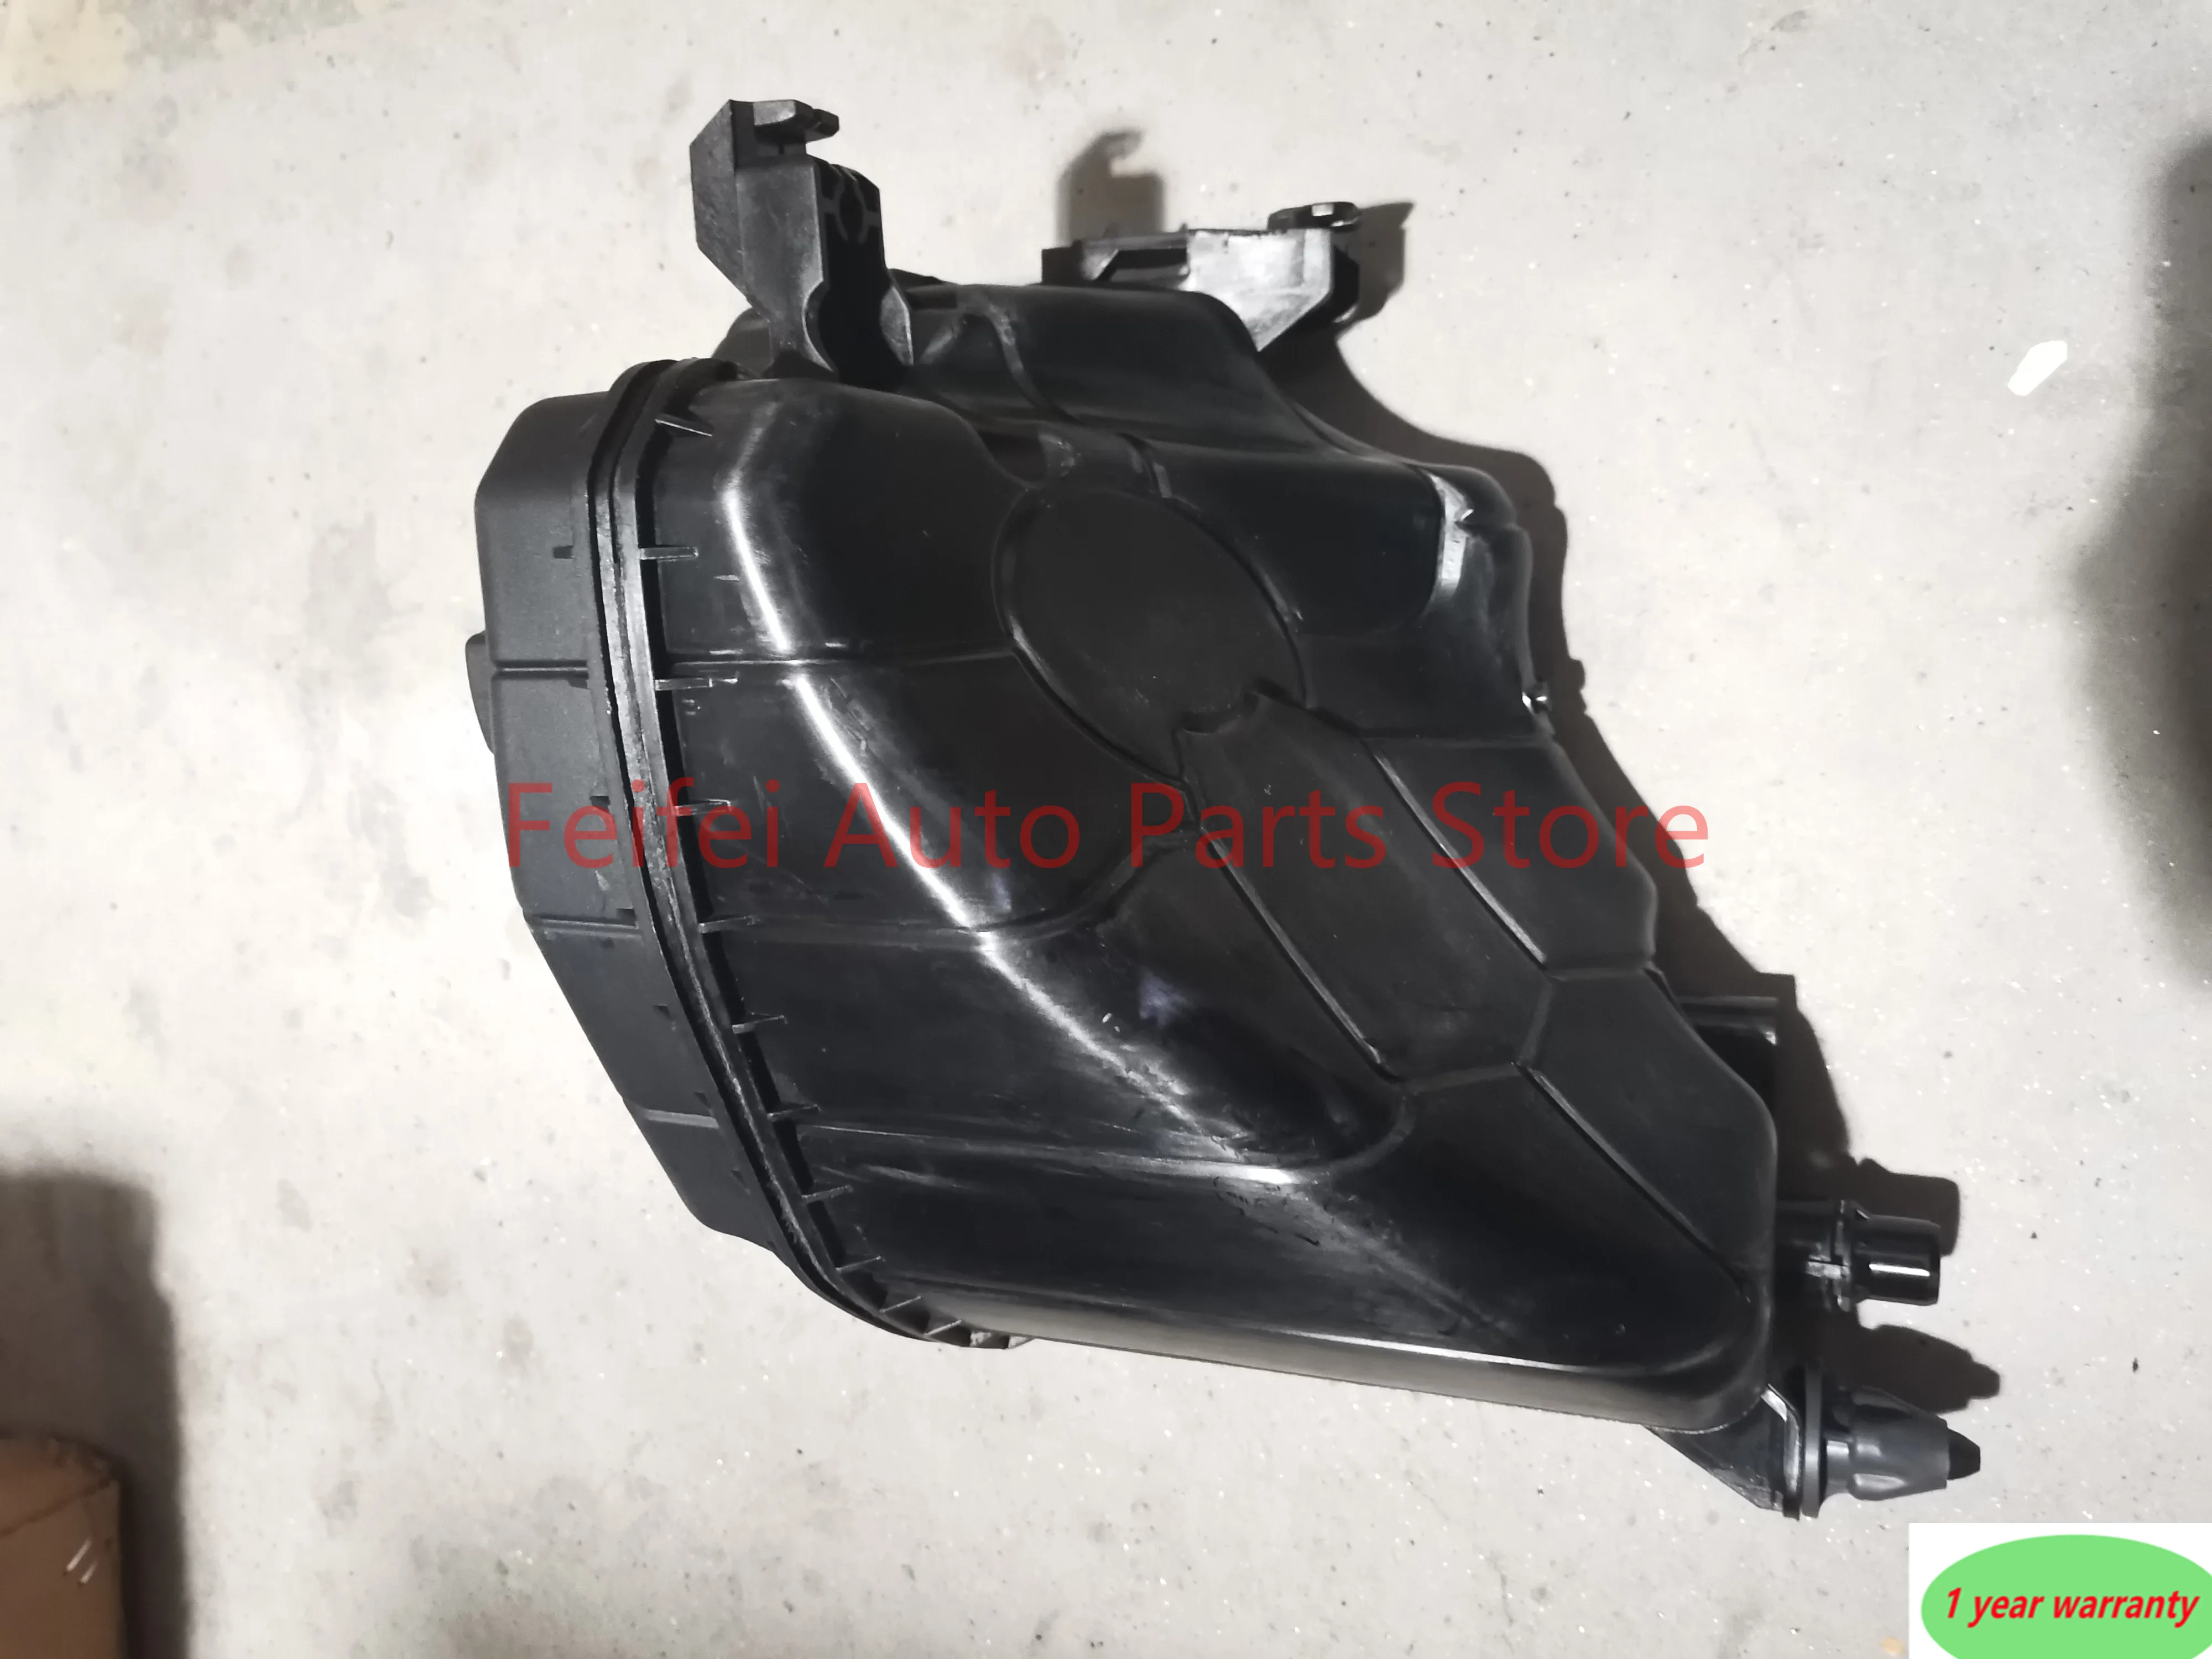 1pc New Hight Quality Coolant Antifreeze Expansion Pot OEM 17138610656 17139884859 For BMW- 5.6.7 Series 540i G30 G11 G12